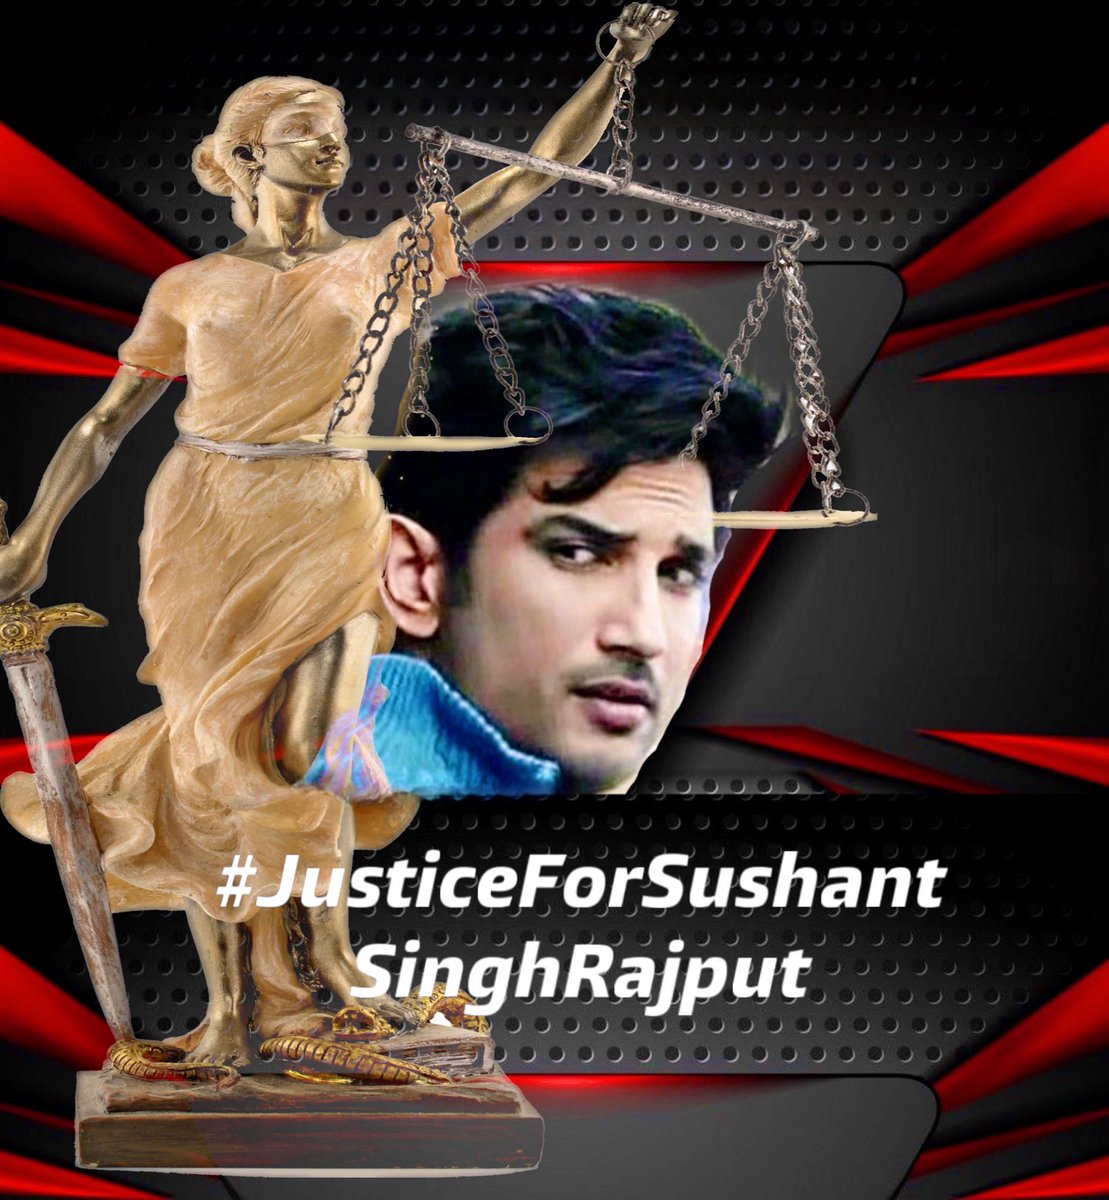 Politics has now almost overshadowed Sushant's culprits. Helplessness against authority is a threat to people of a democratic country. CBI,will you show ur devotion to duty? Sushant lived a high life,stayed true to his roots.He never compromised his morals Sushant A Man Of Values